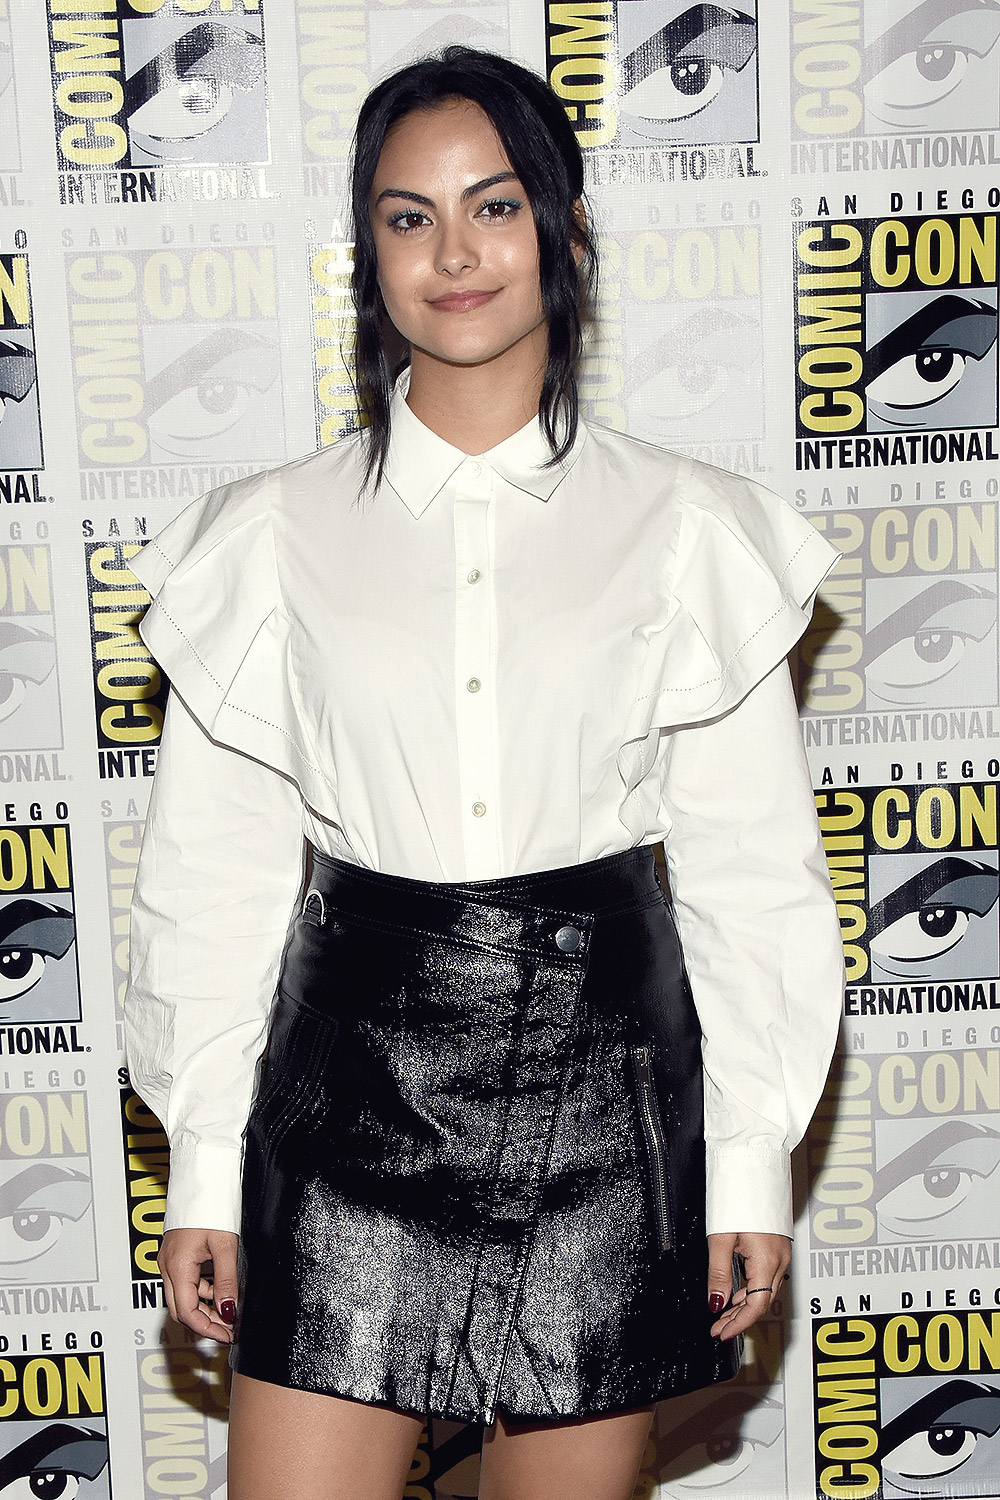 Camila Mendes attends Entertainment Weekly Annual Comic-Con Party